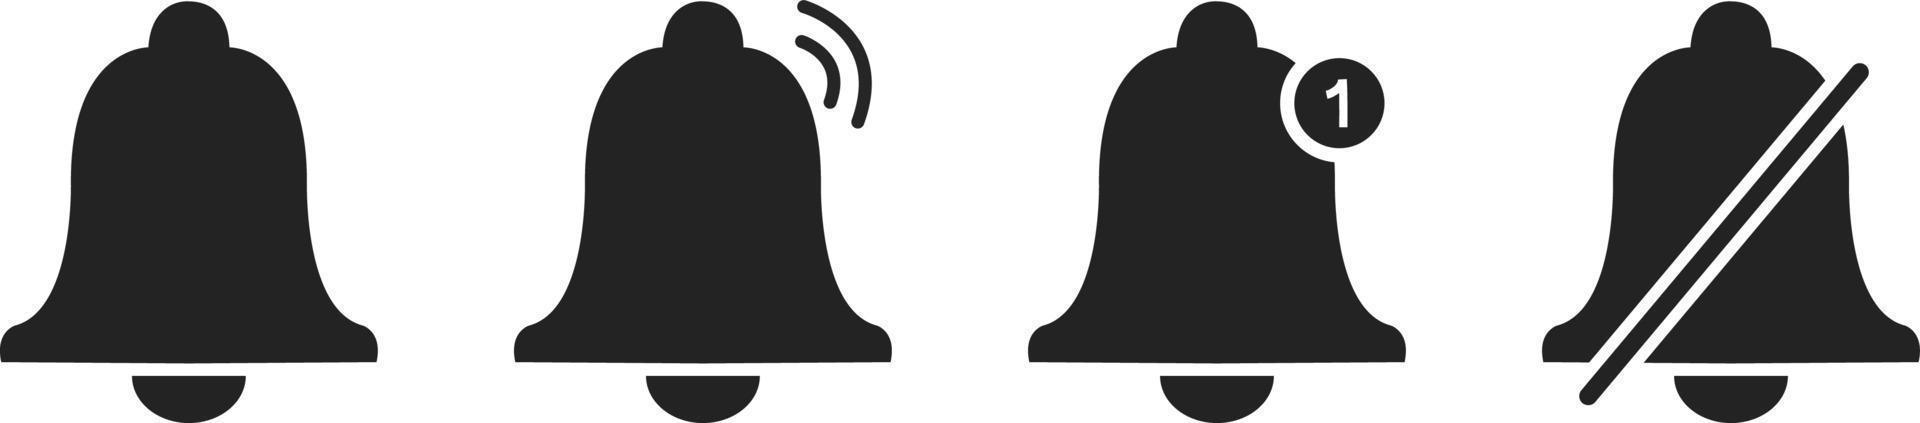 Notification bell icons isolate on white background. vector